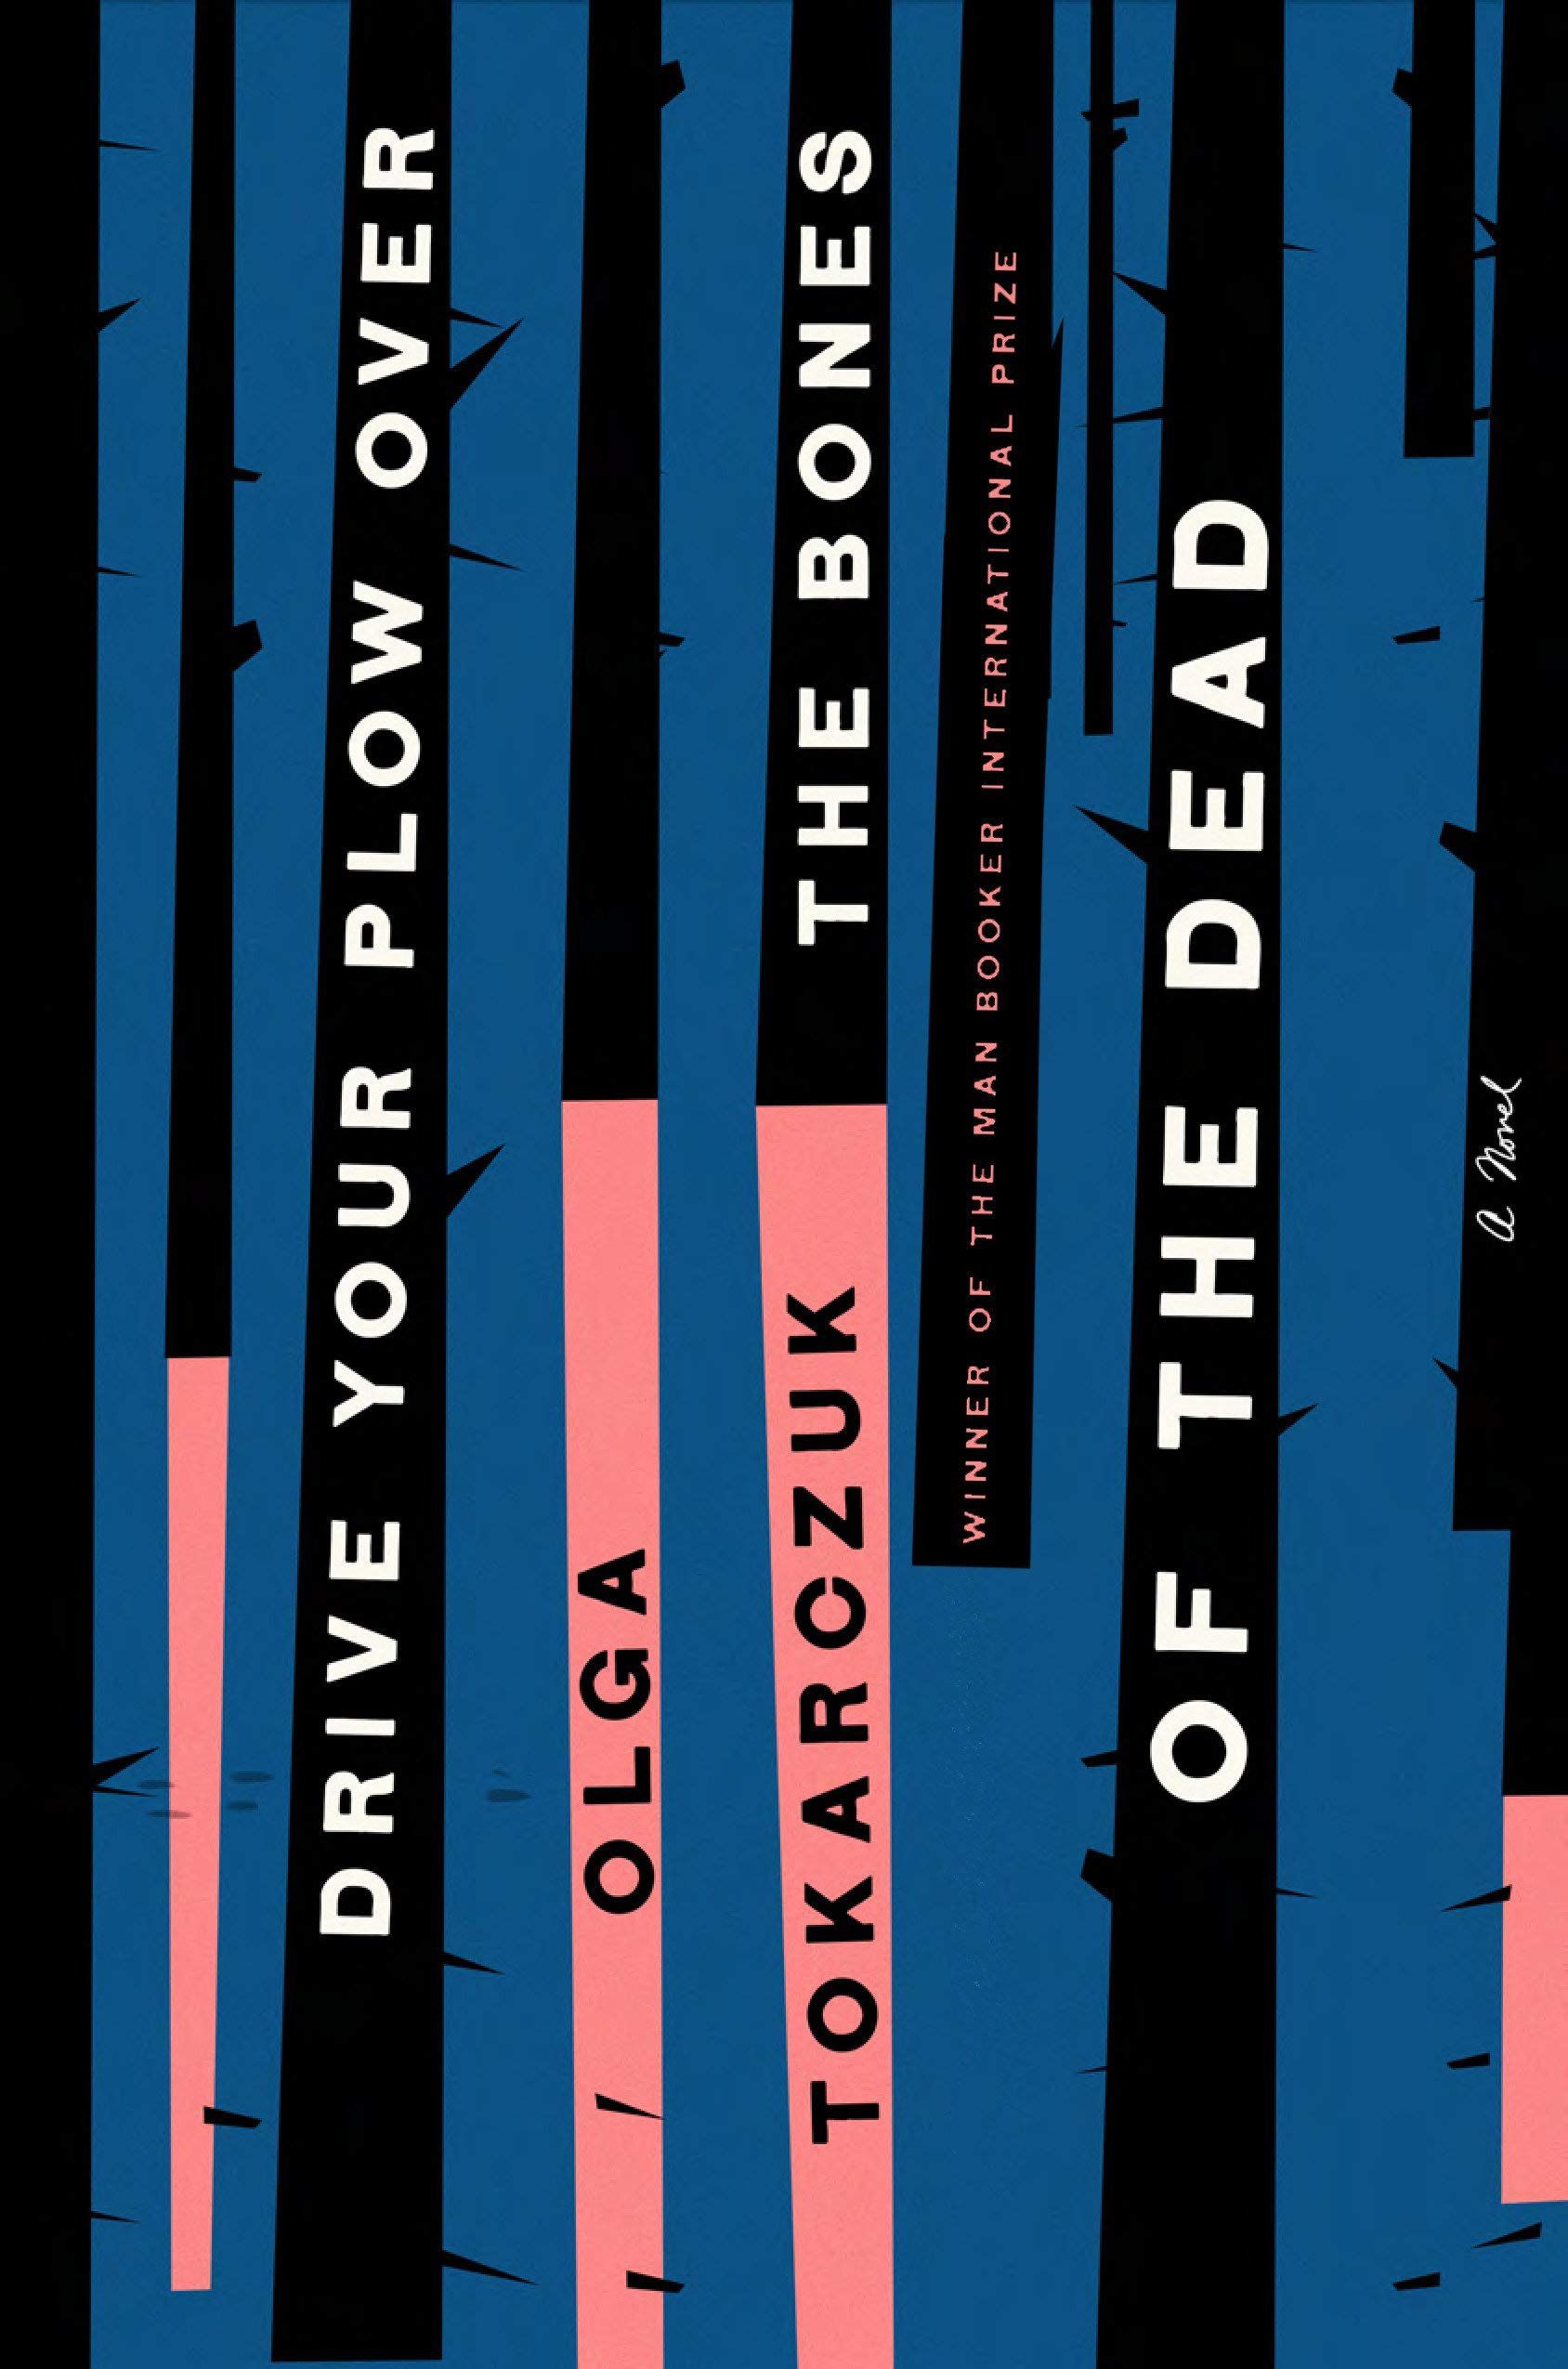 Meat Is Murder: On Olga Tokarczuk’s “Drive Your Plow Over the Bones of the Dead”